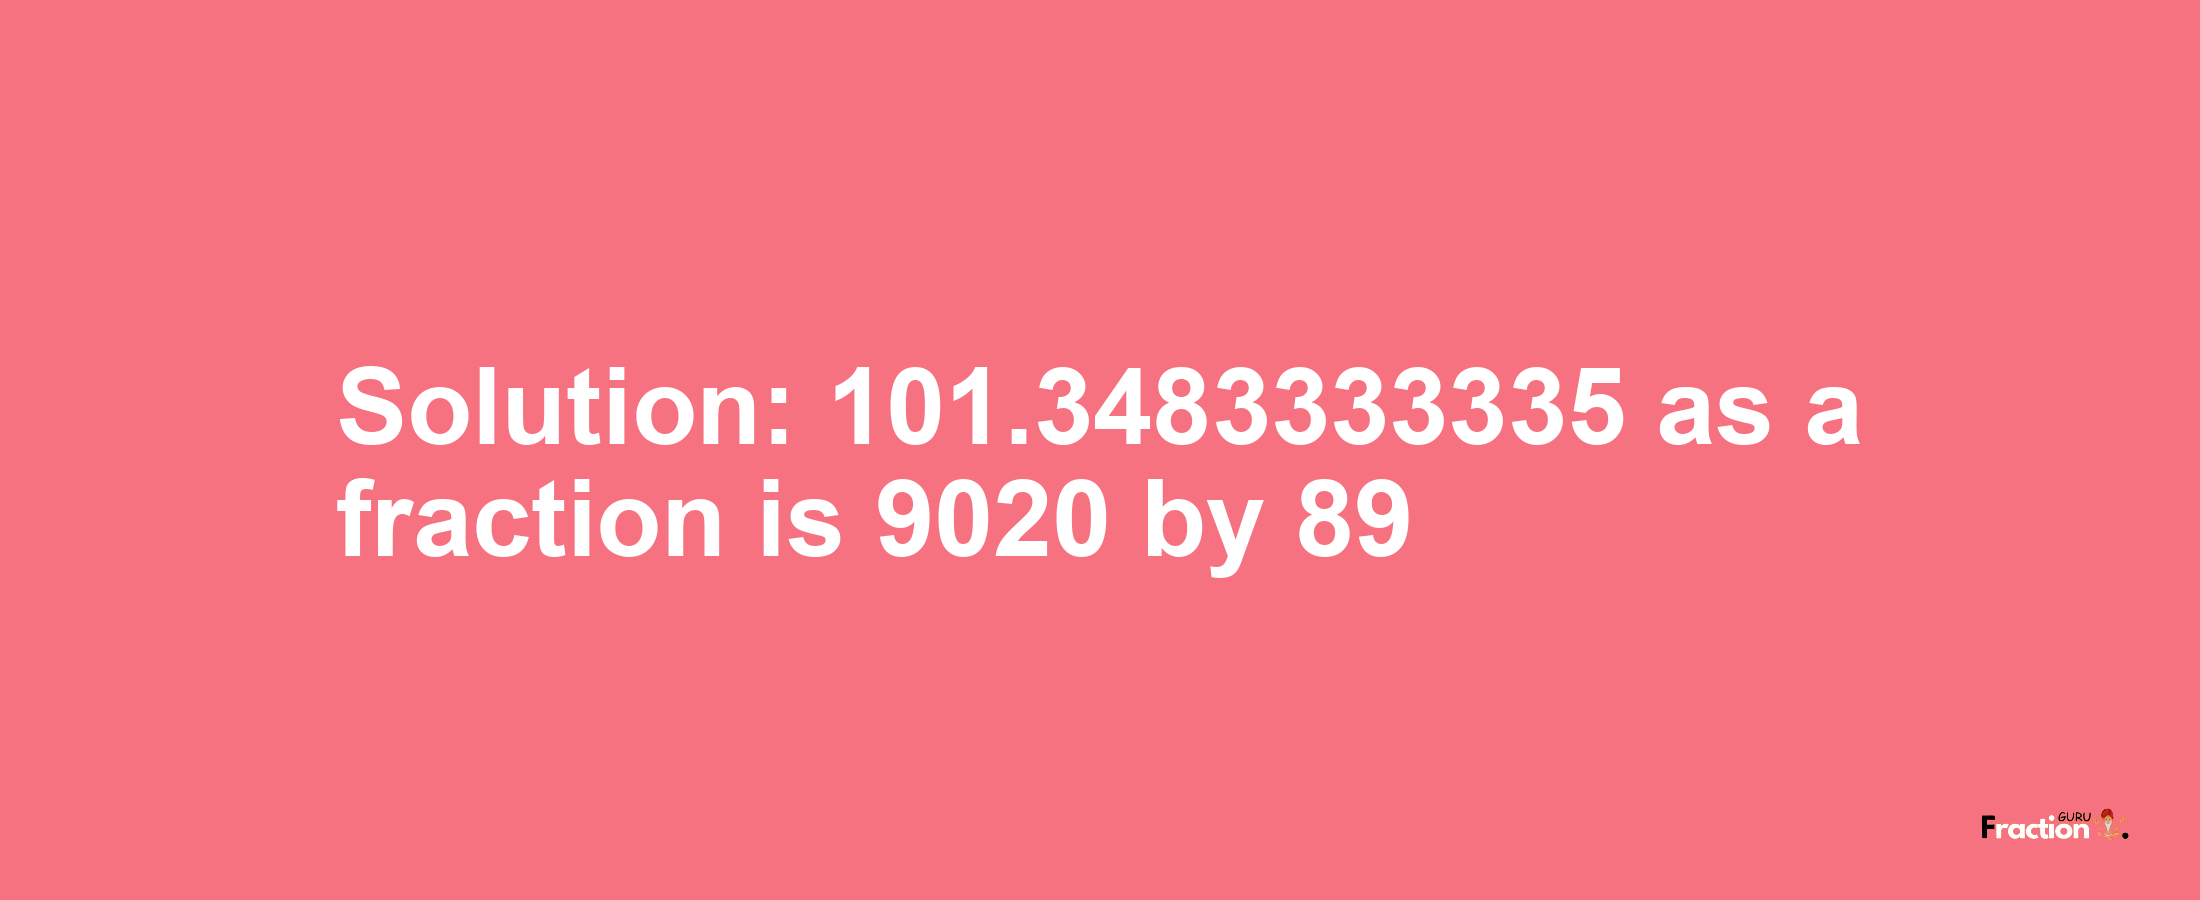 Solution:101.3483333335 as a fraction is 9020/89